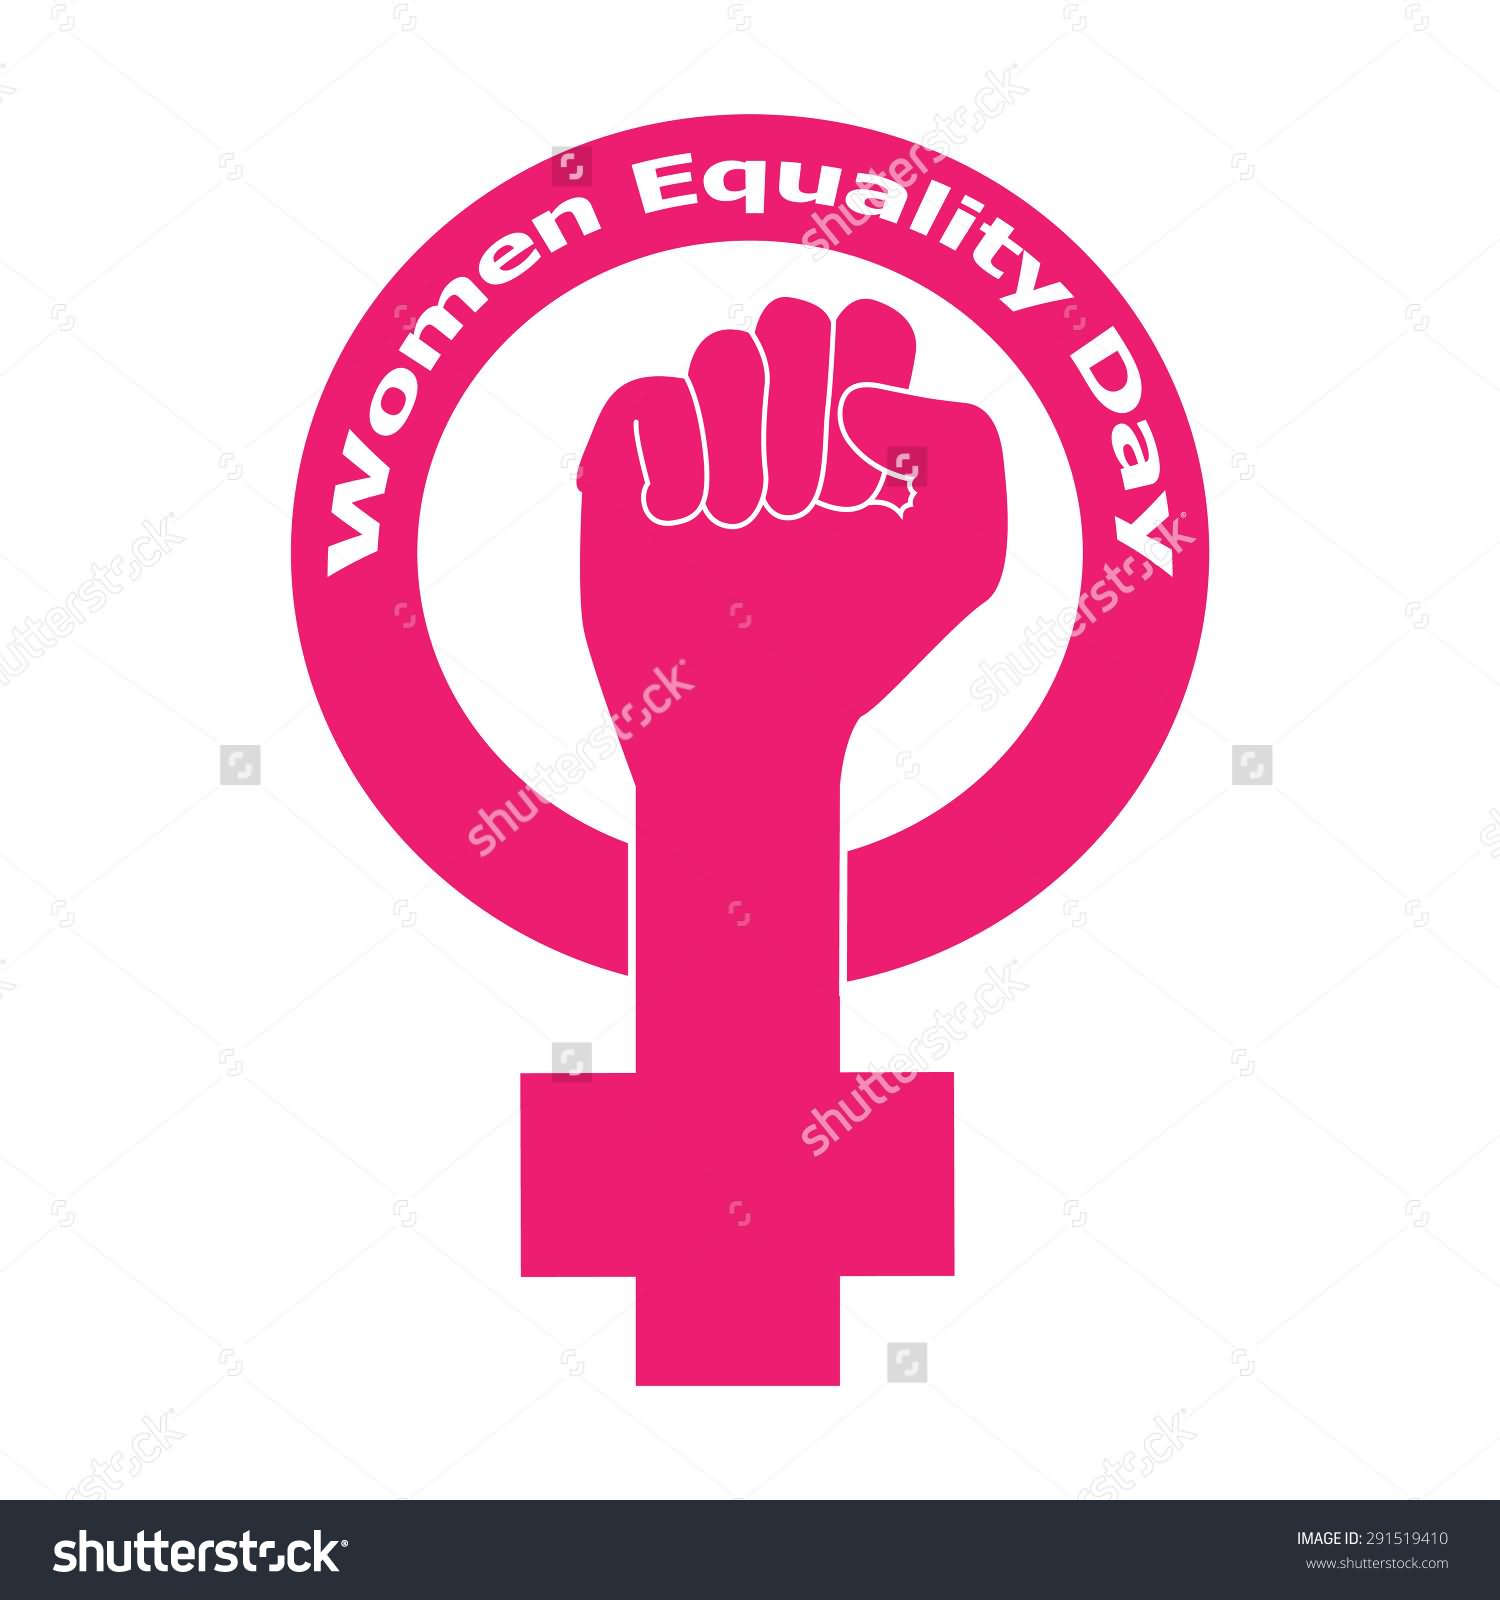 Women's Equality Day Logo Image